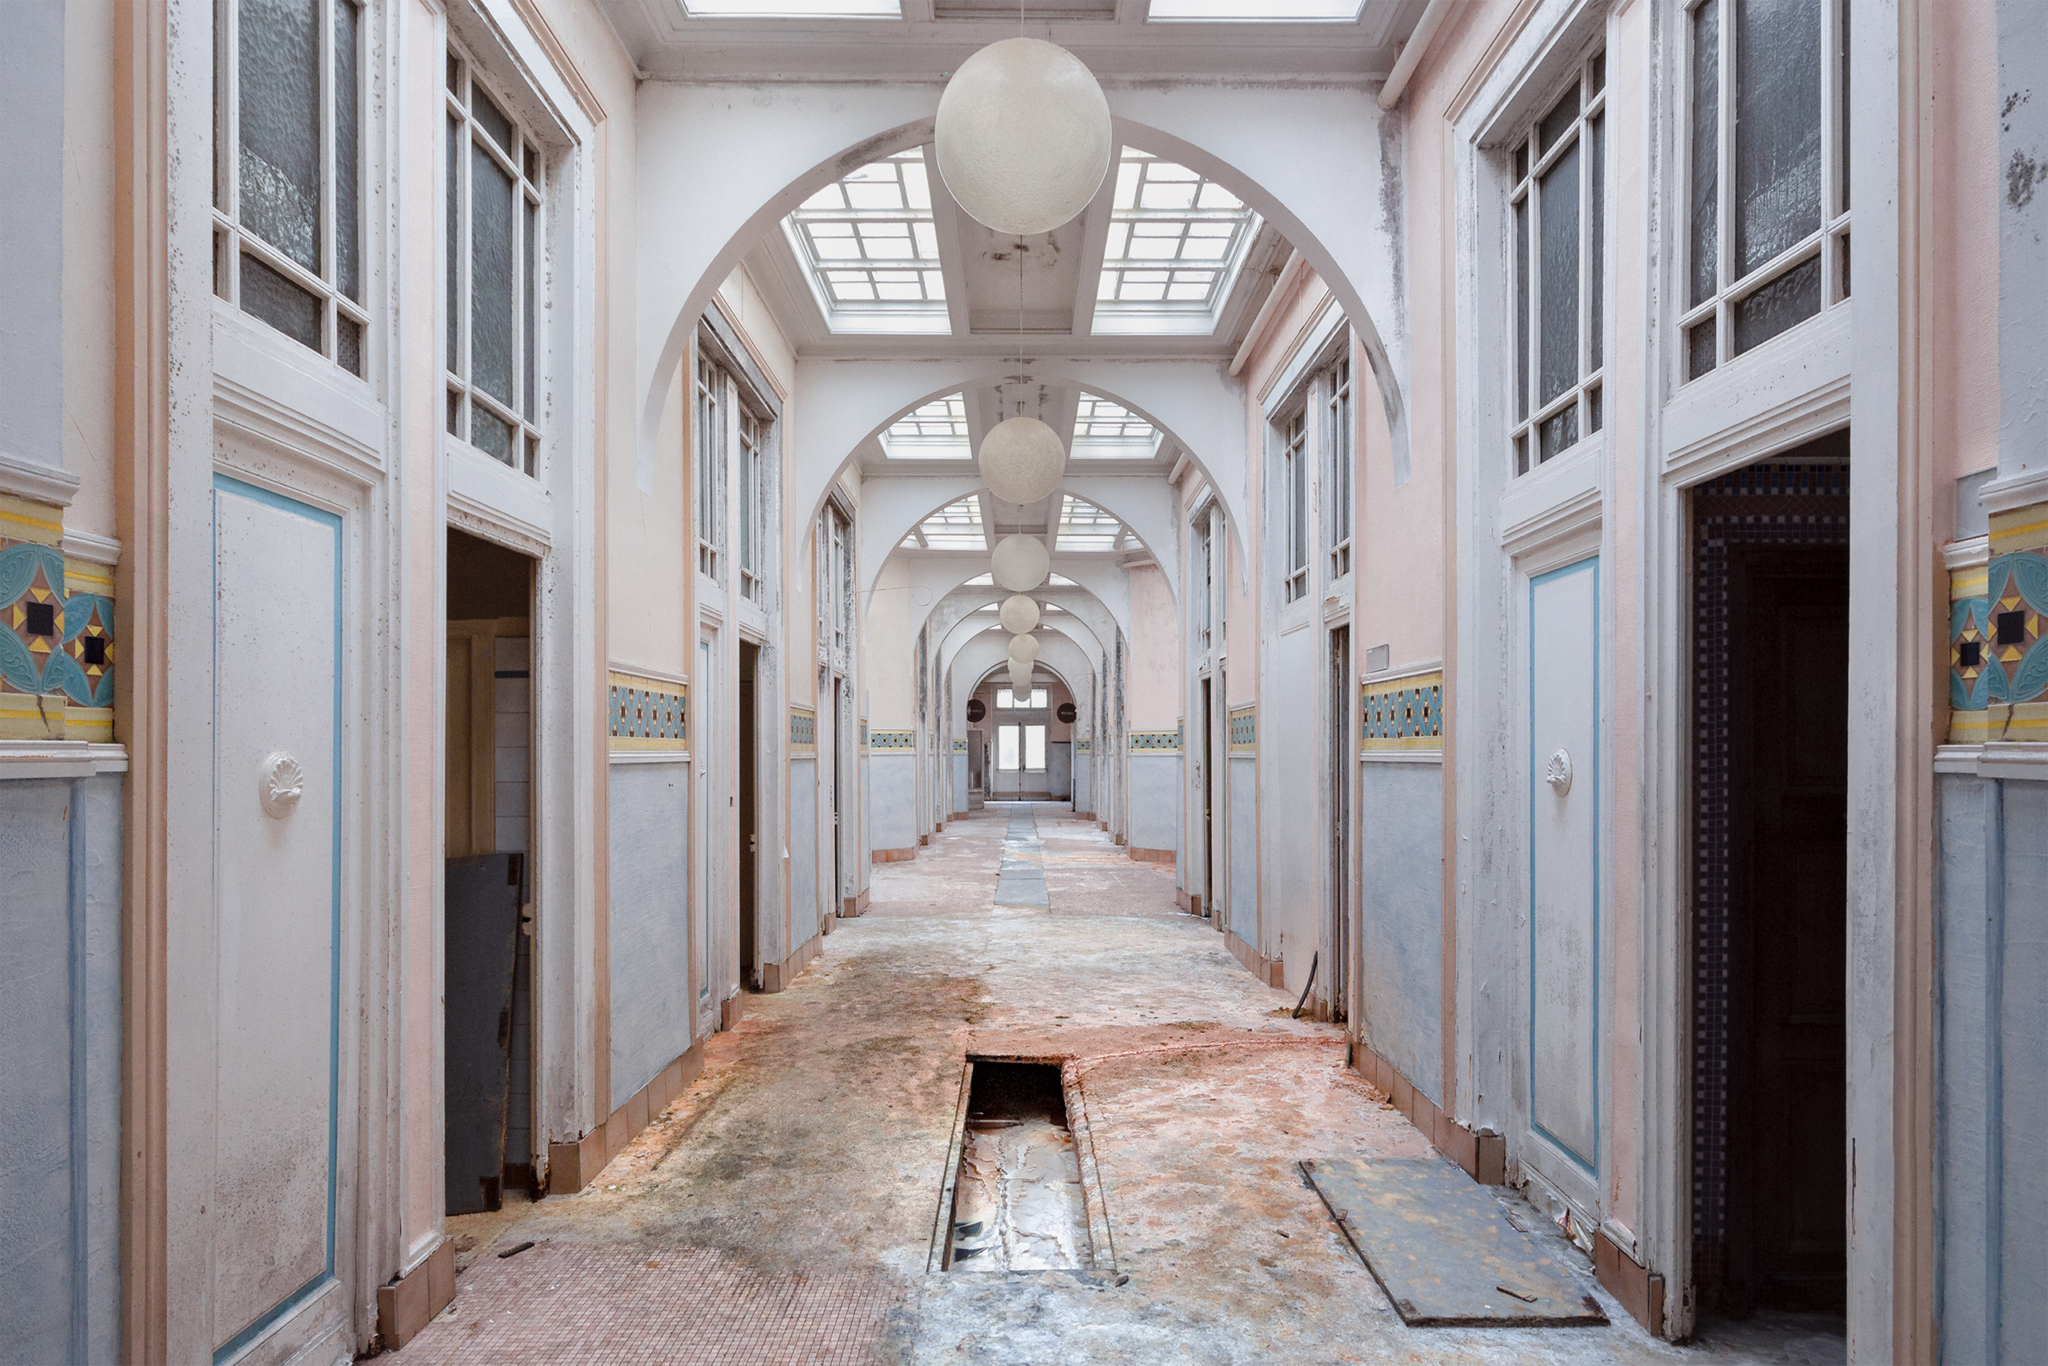 Abandoned corridors inside thermal baths with grandiose architecture in France